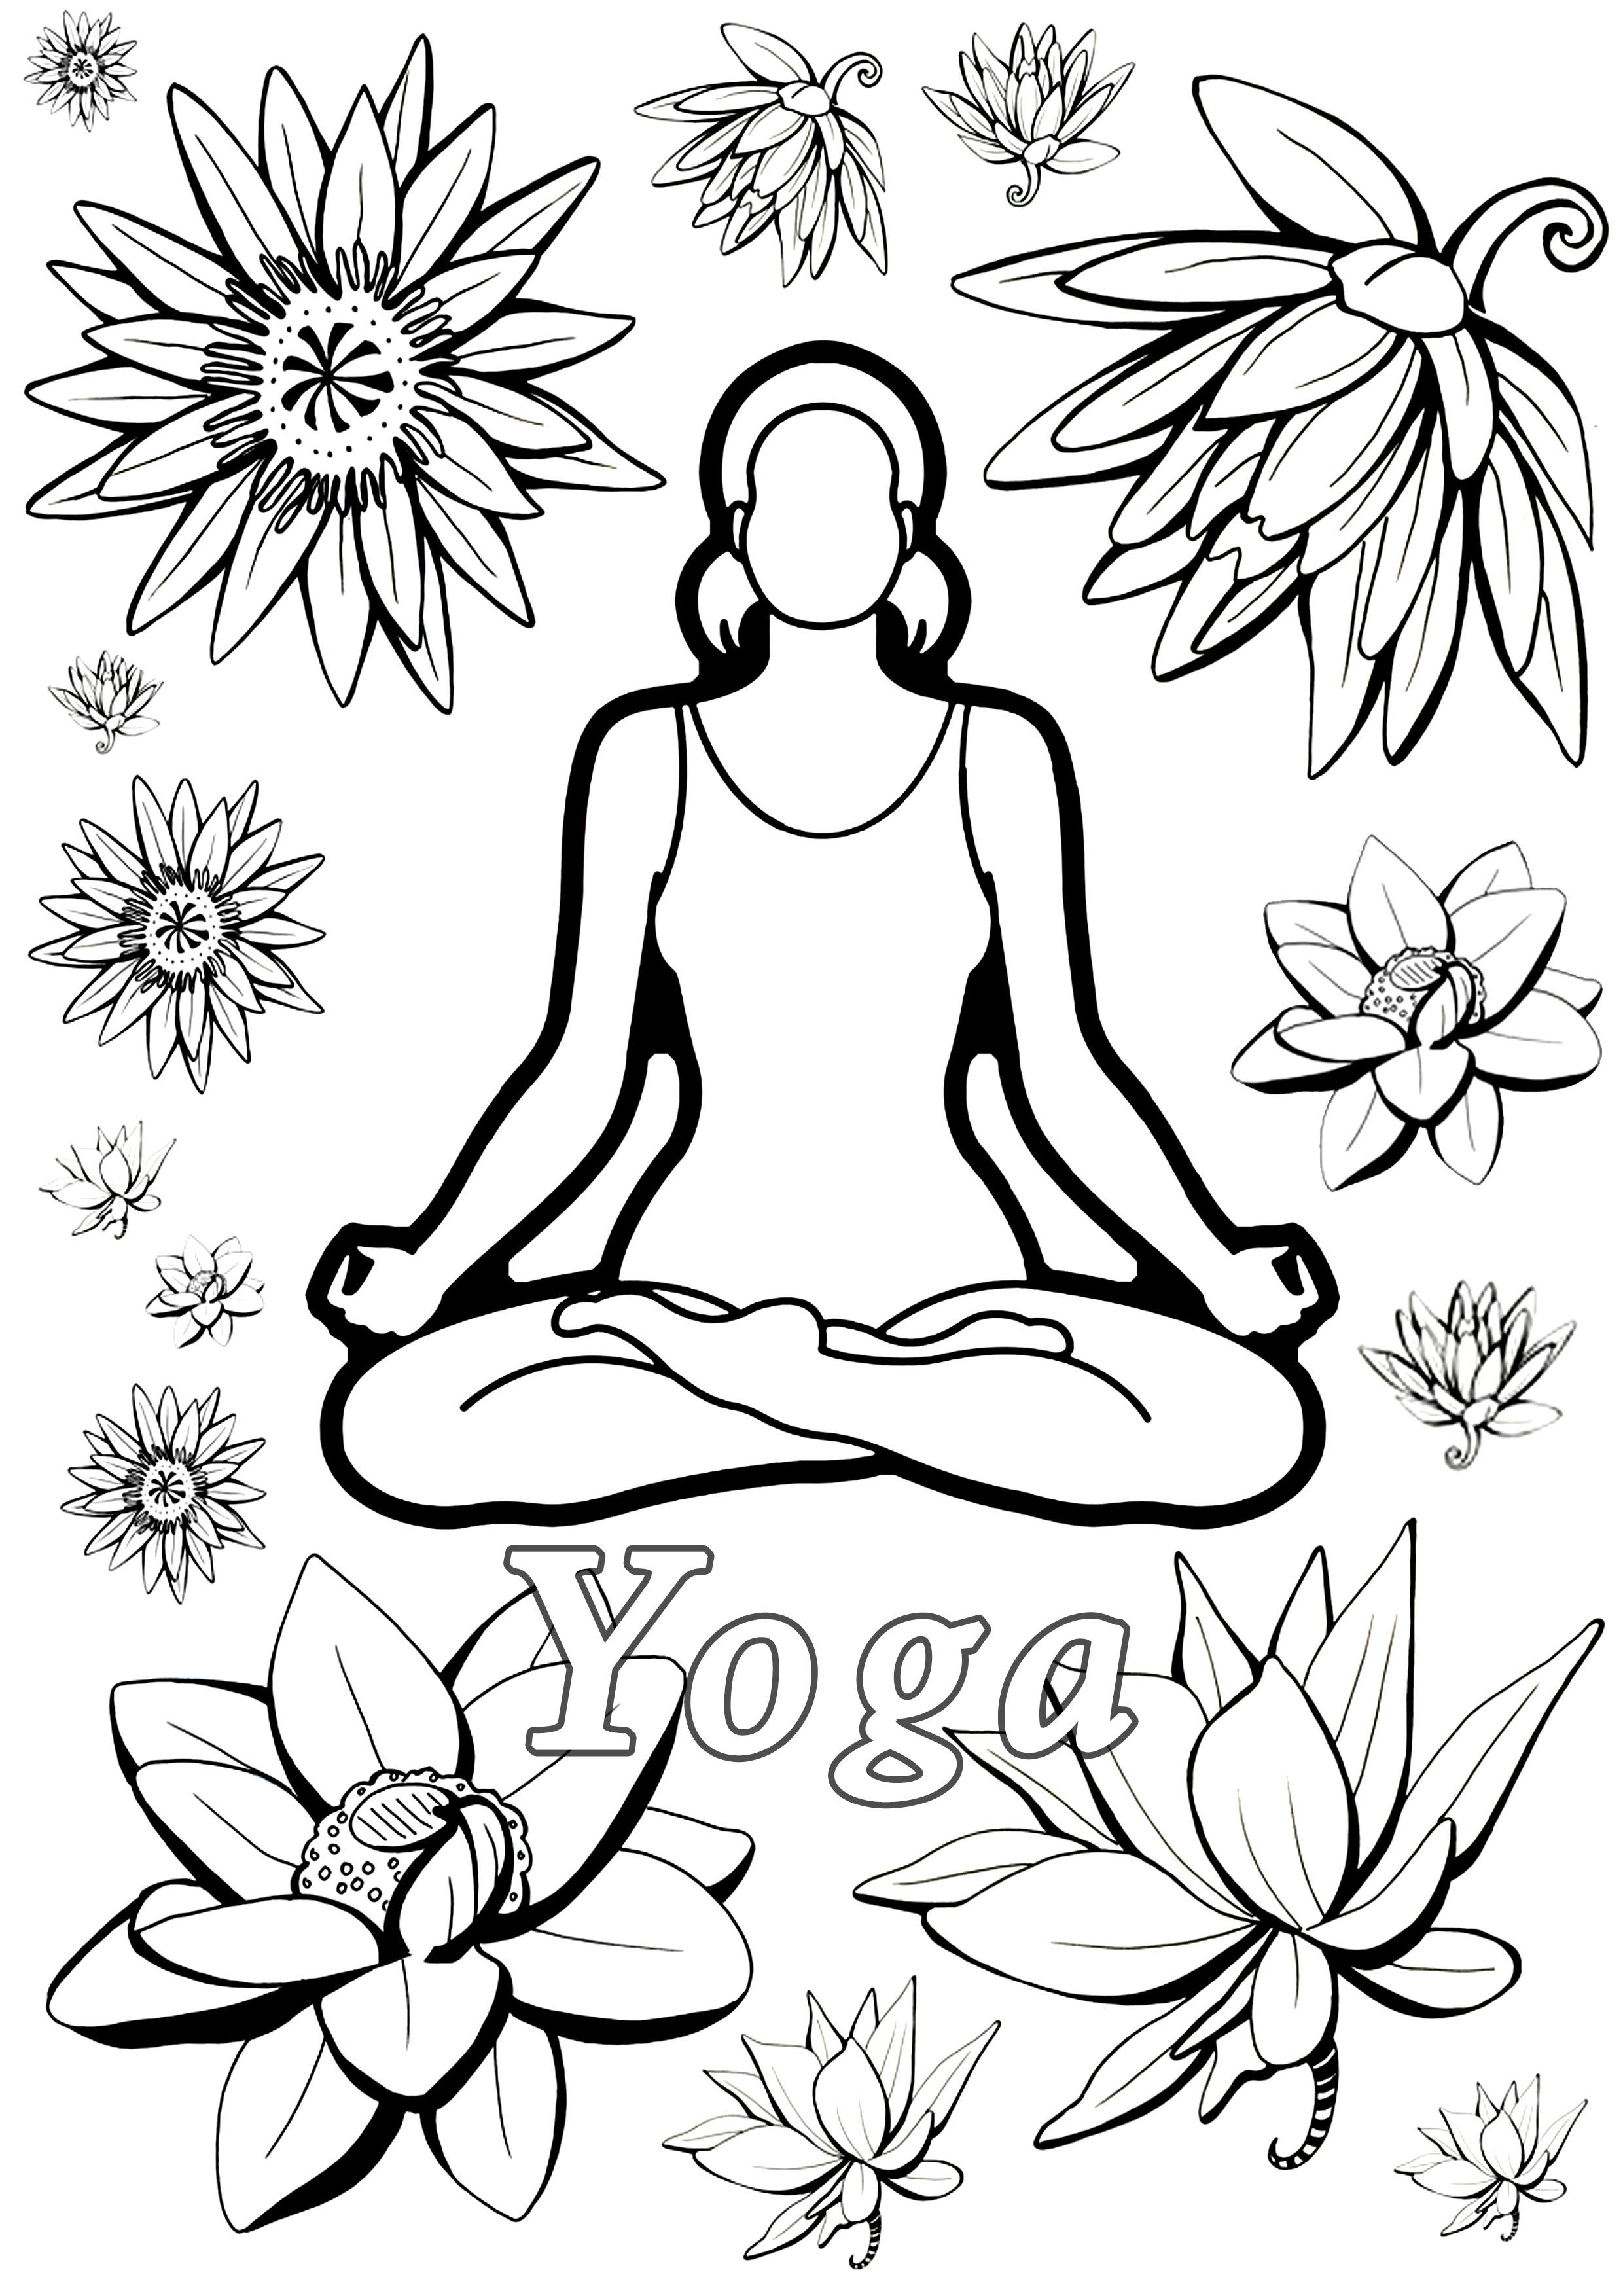 Coloring page inspired by Yoga : woman meditating and Lotus Flowers, Artist : Art. Isabelle